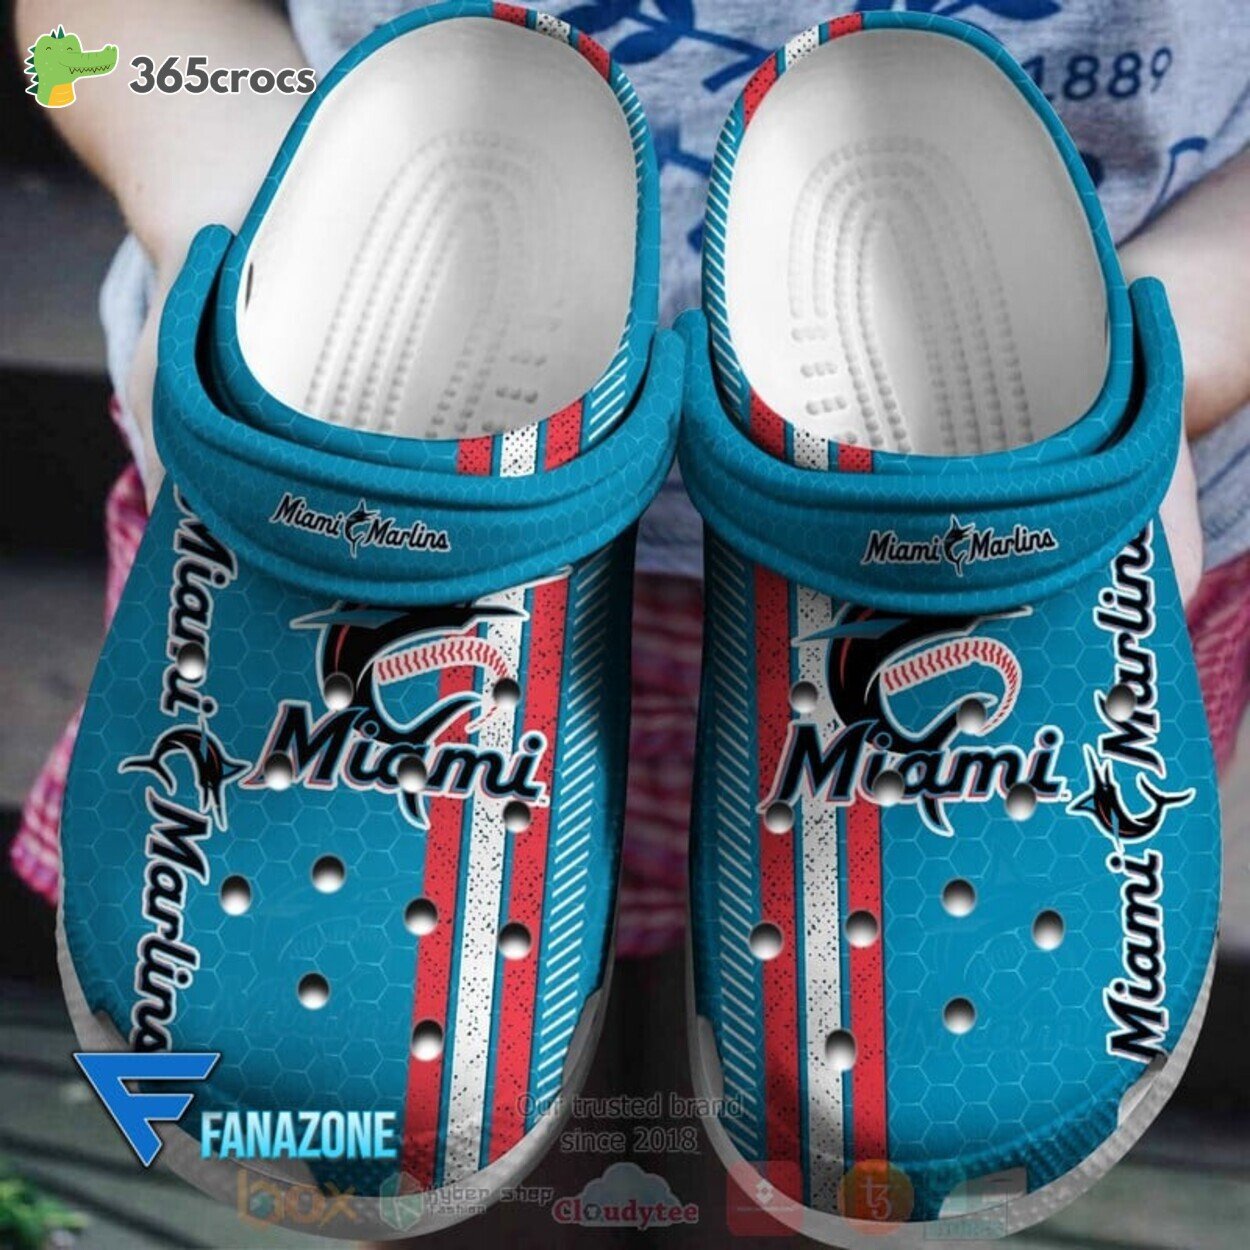 Miami Marlins MLB Sport Premium Comfortable Clogs Crocss Shoes Edition One